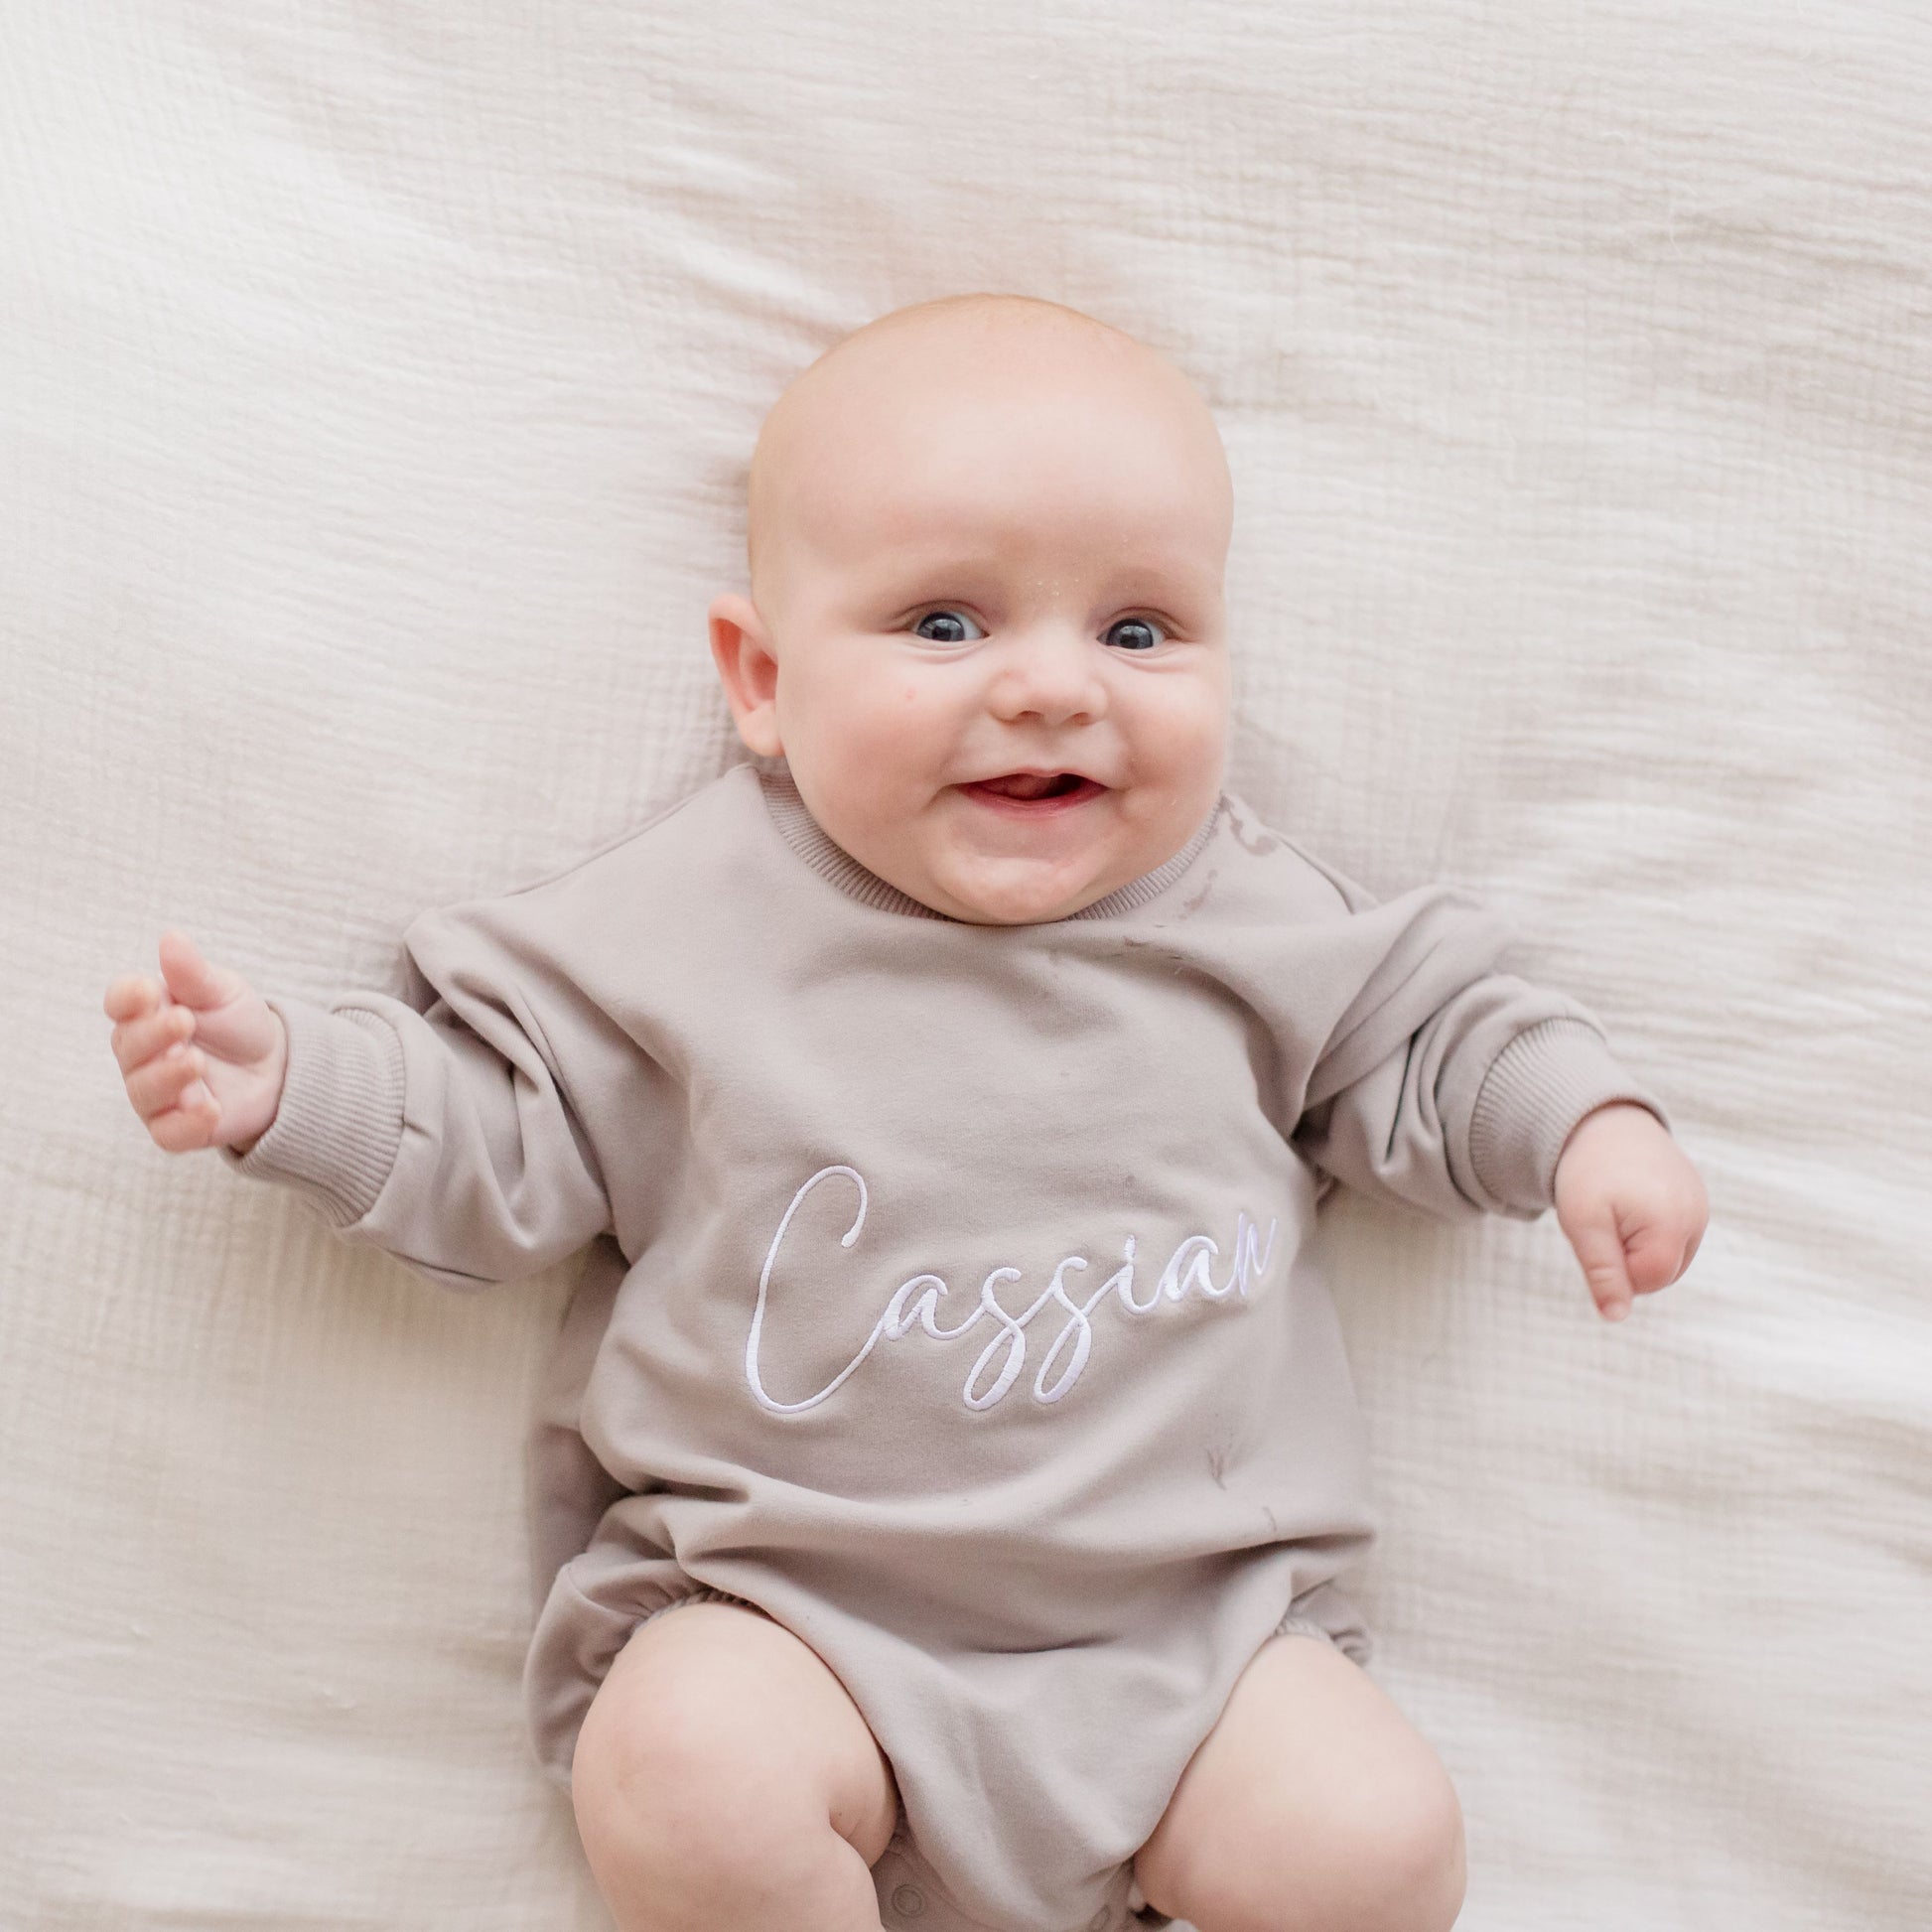 Grey Romper personalised with embroidery. Childs name embroidered